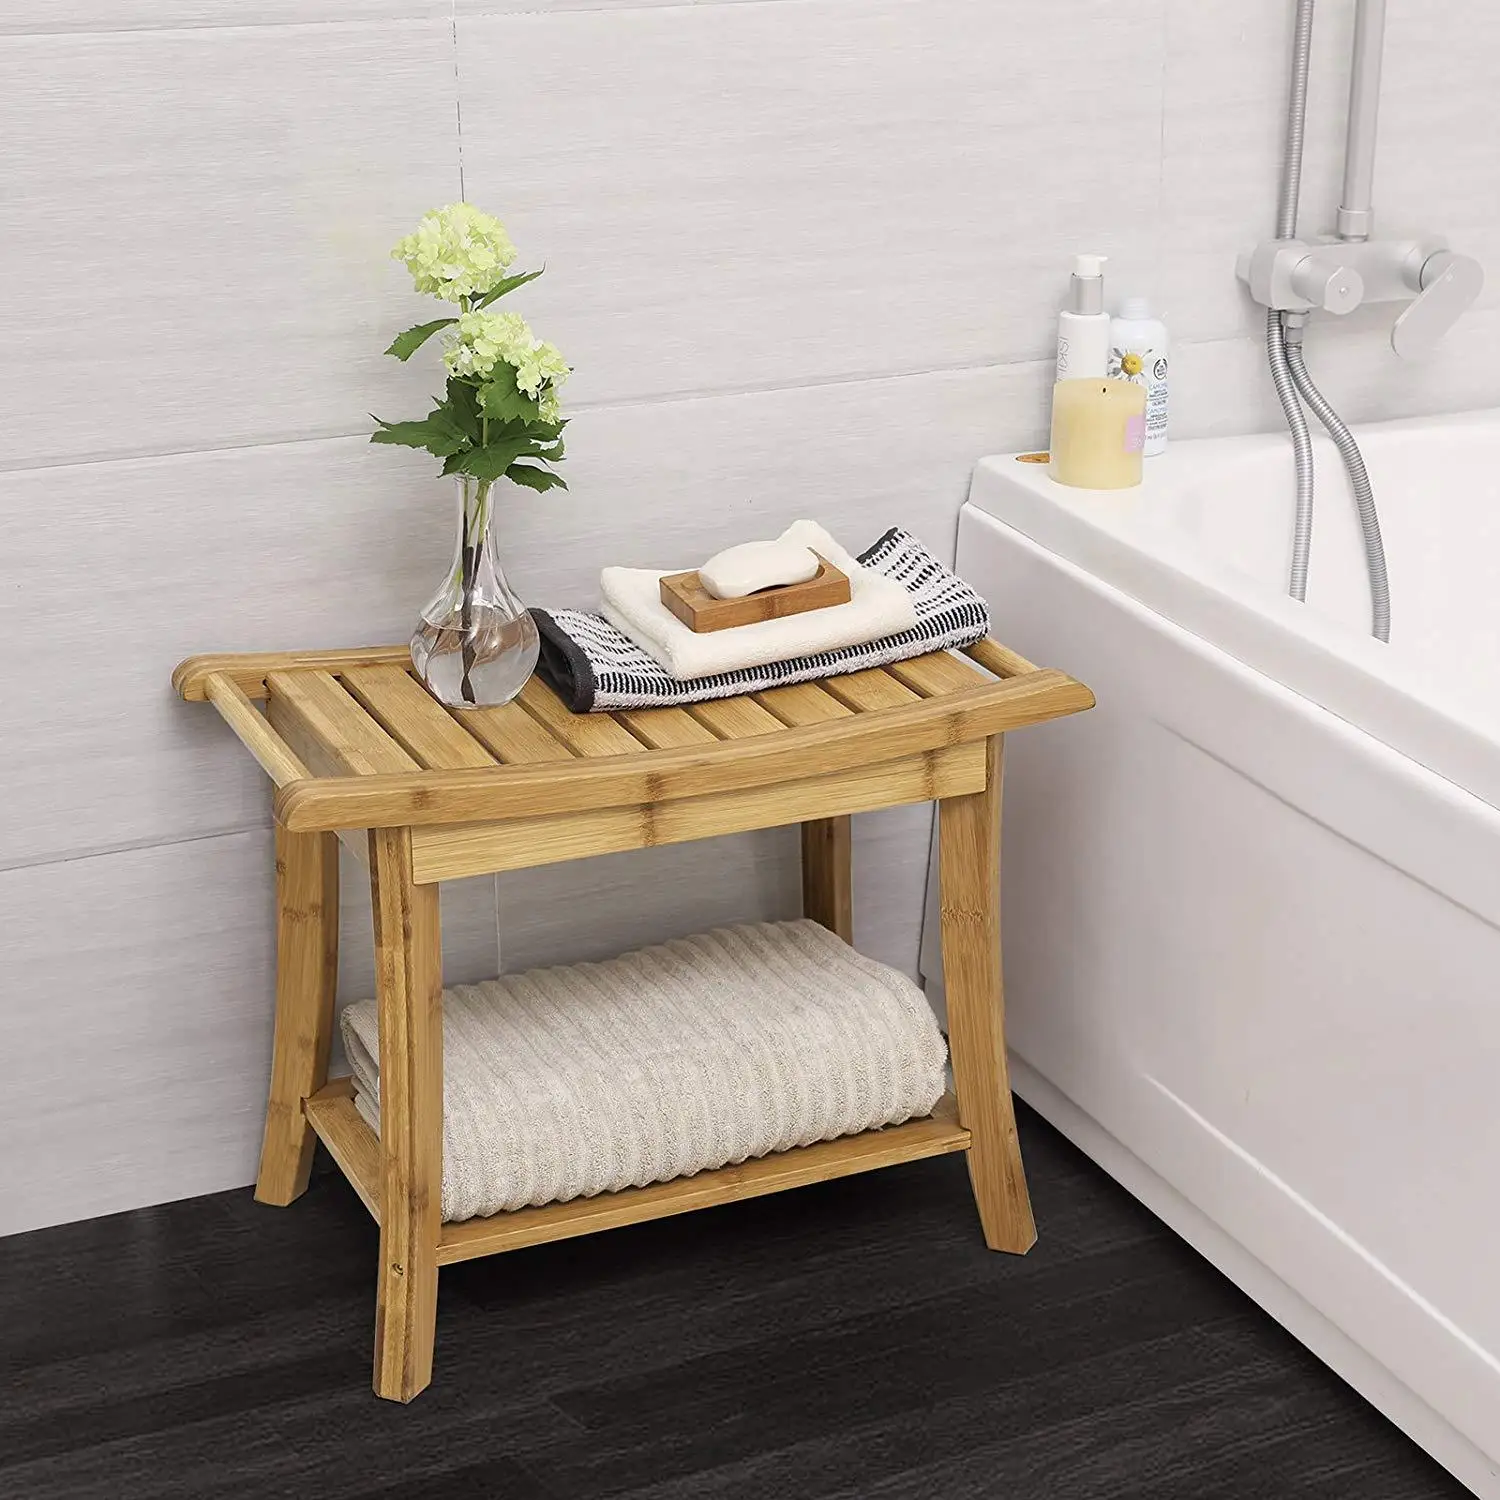 Bamboo Shower Bench Bathroom Stool Spa Bath Shower Stool with Storage Shelf Wood Bench for Indoor Outdoor Use